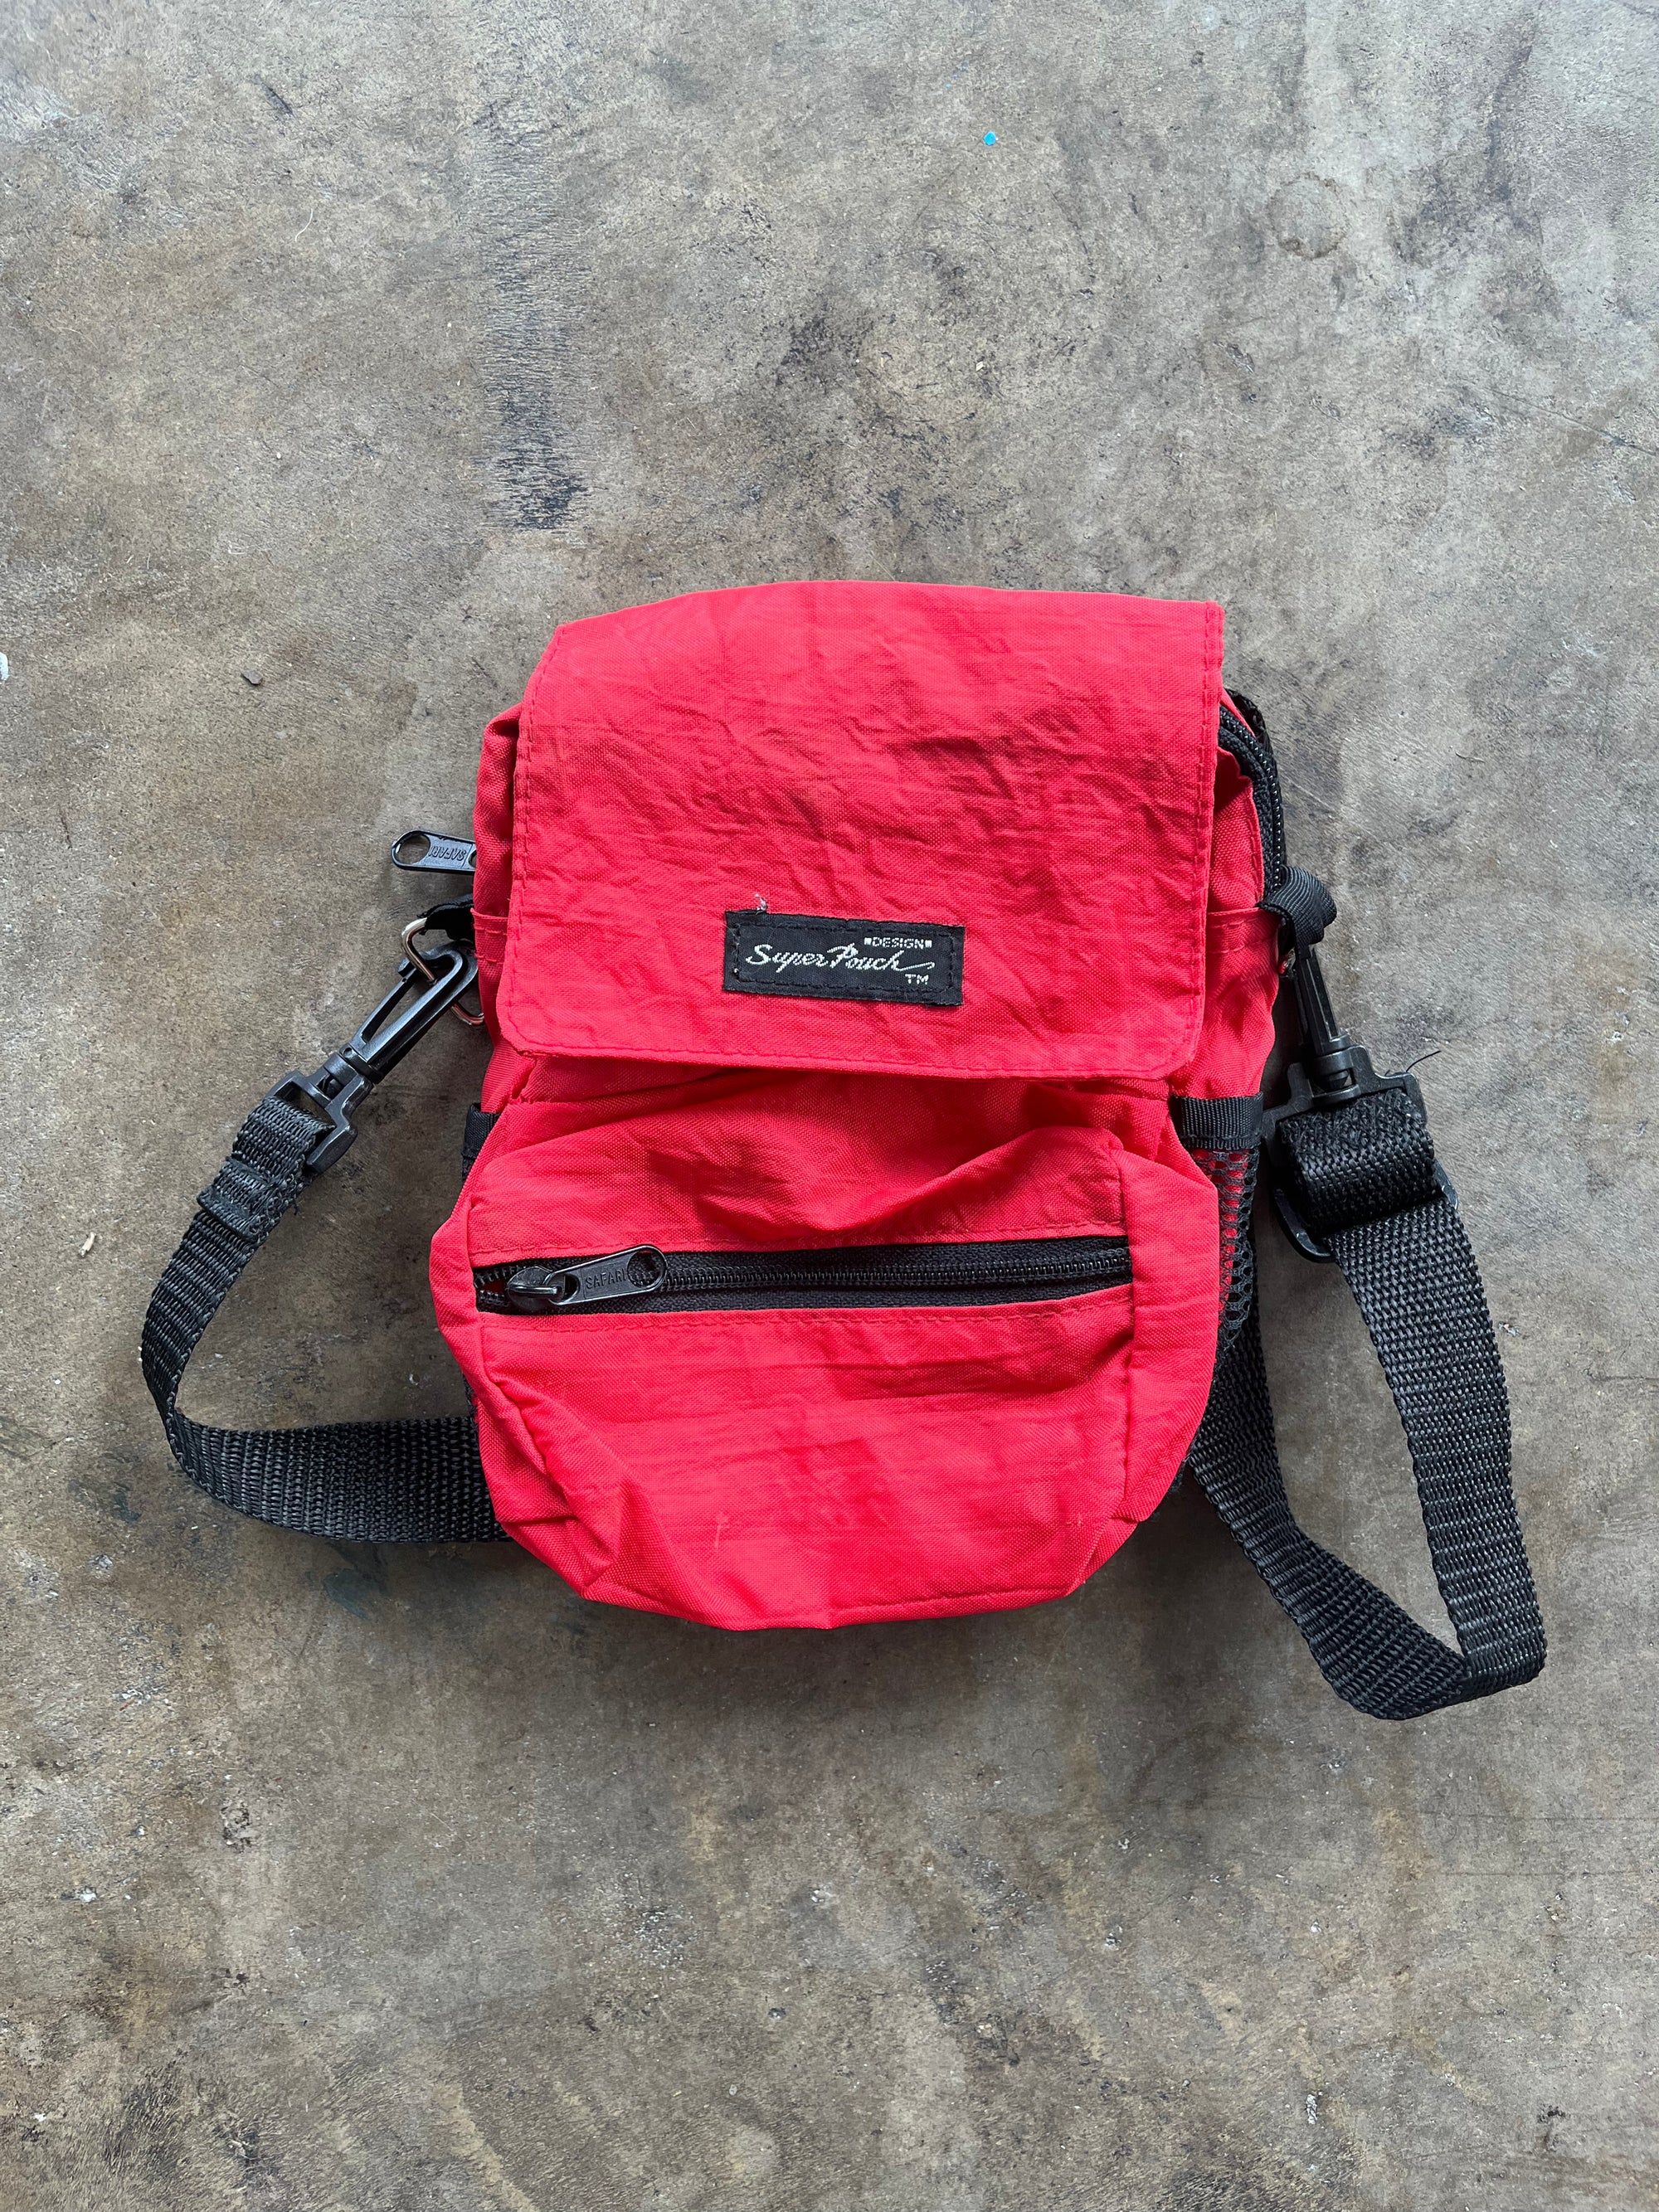 Red Nylon Pouch Bag